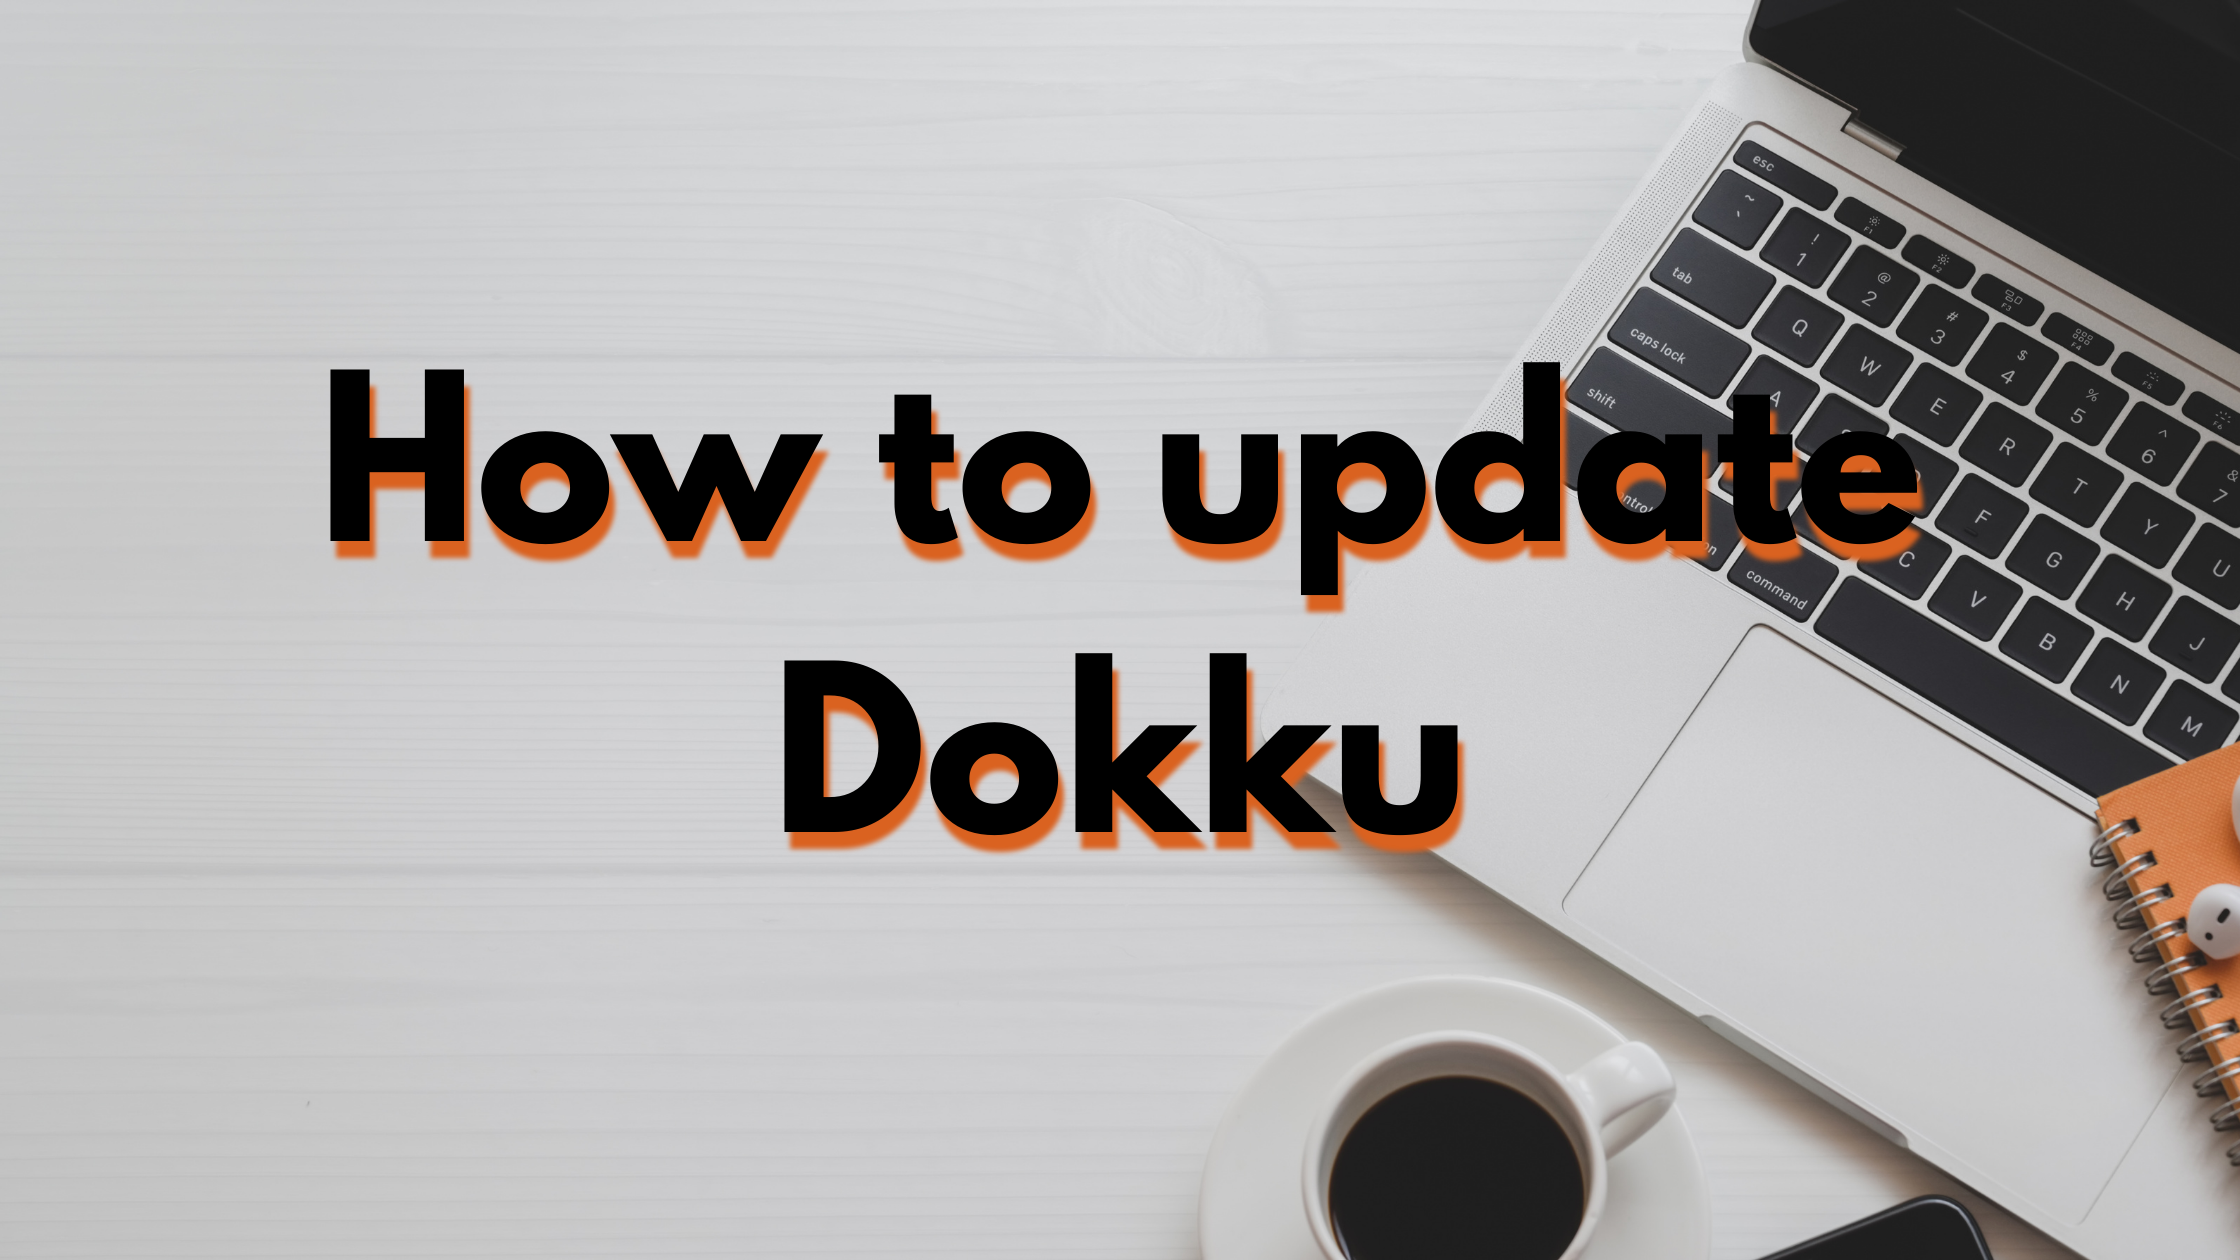 The image portais the text "How to update Dokku" above the image of a computer